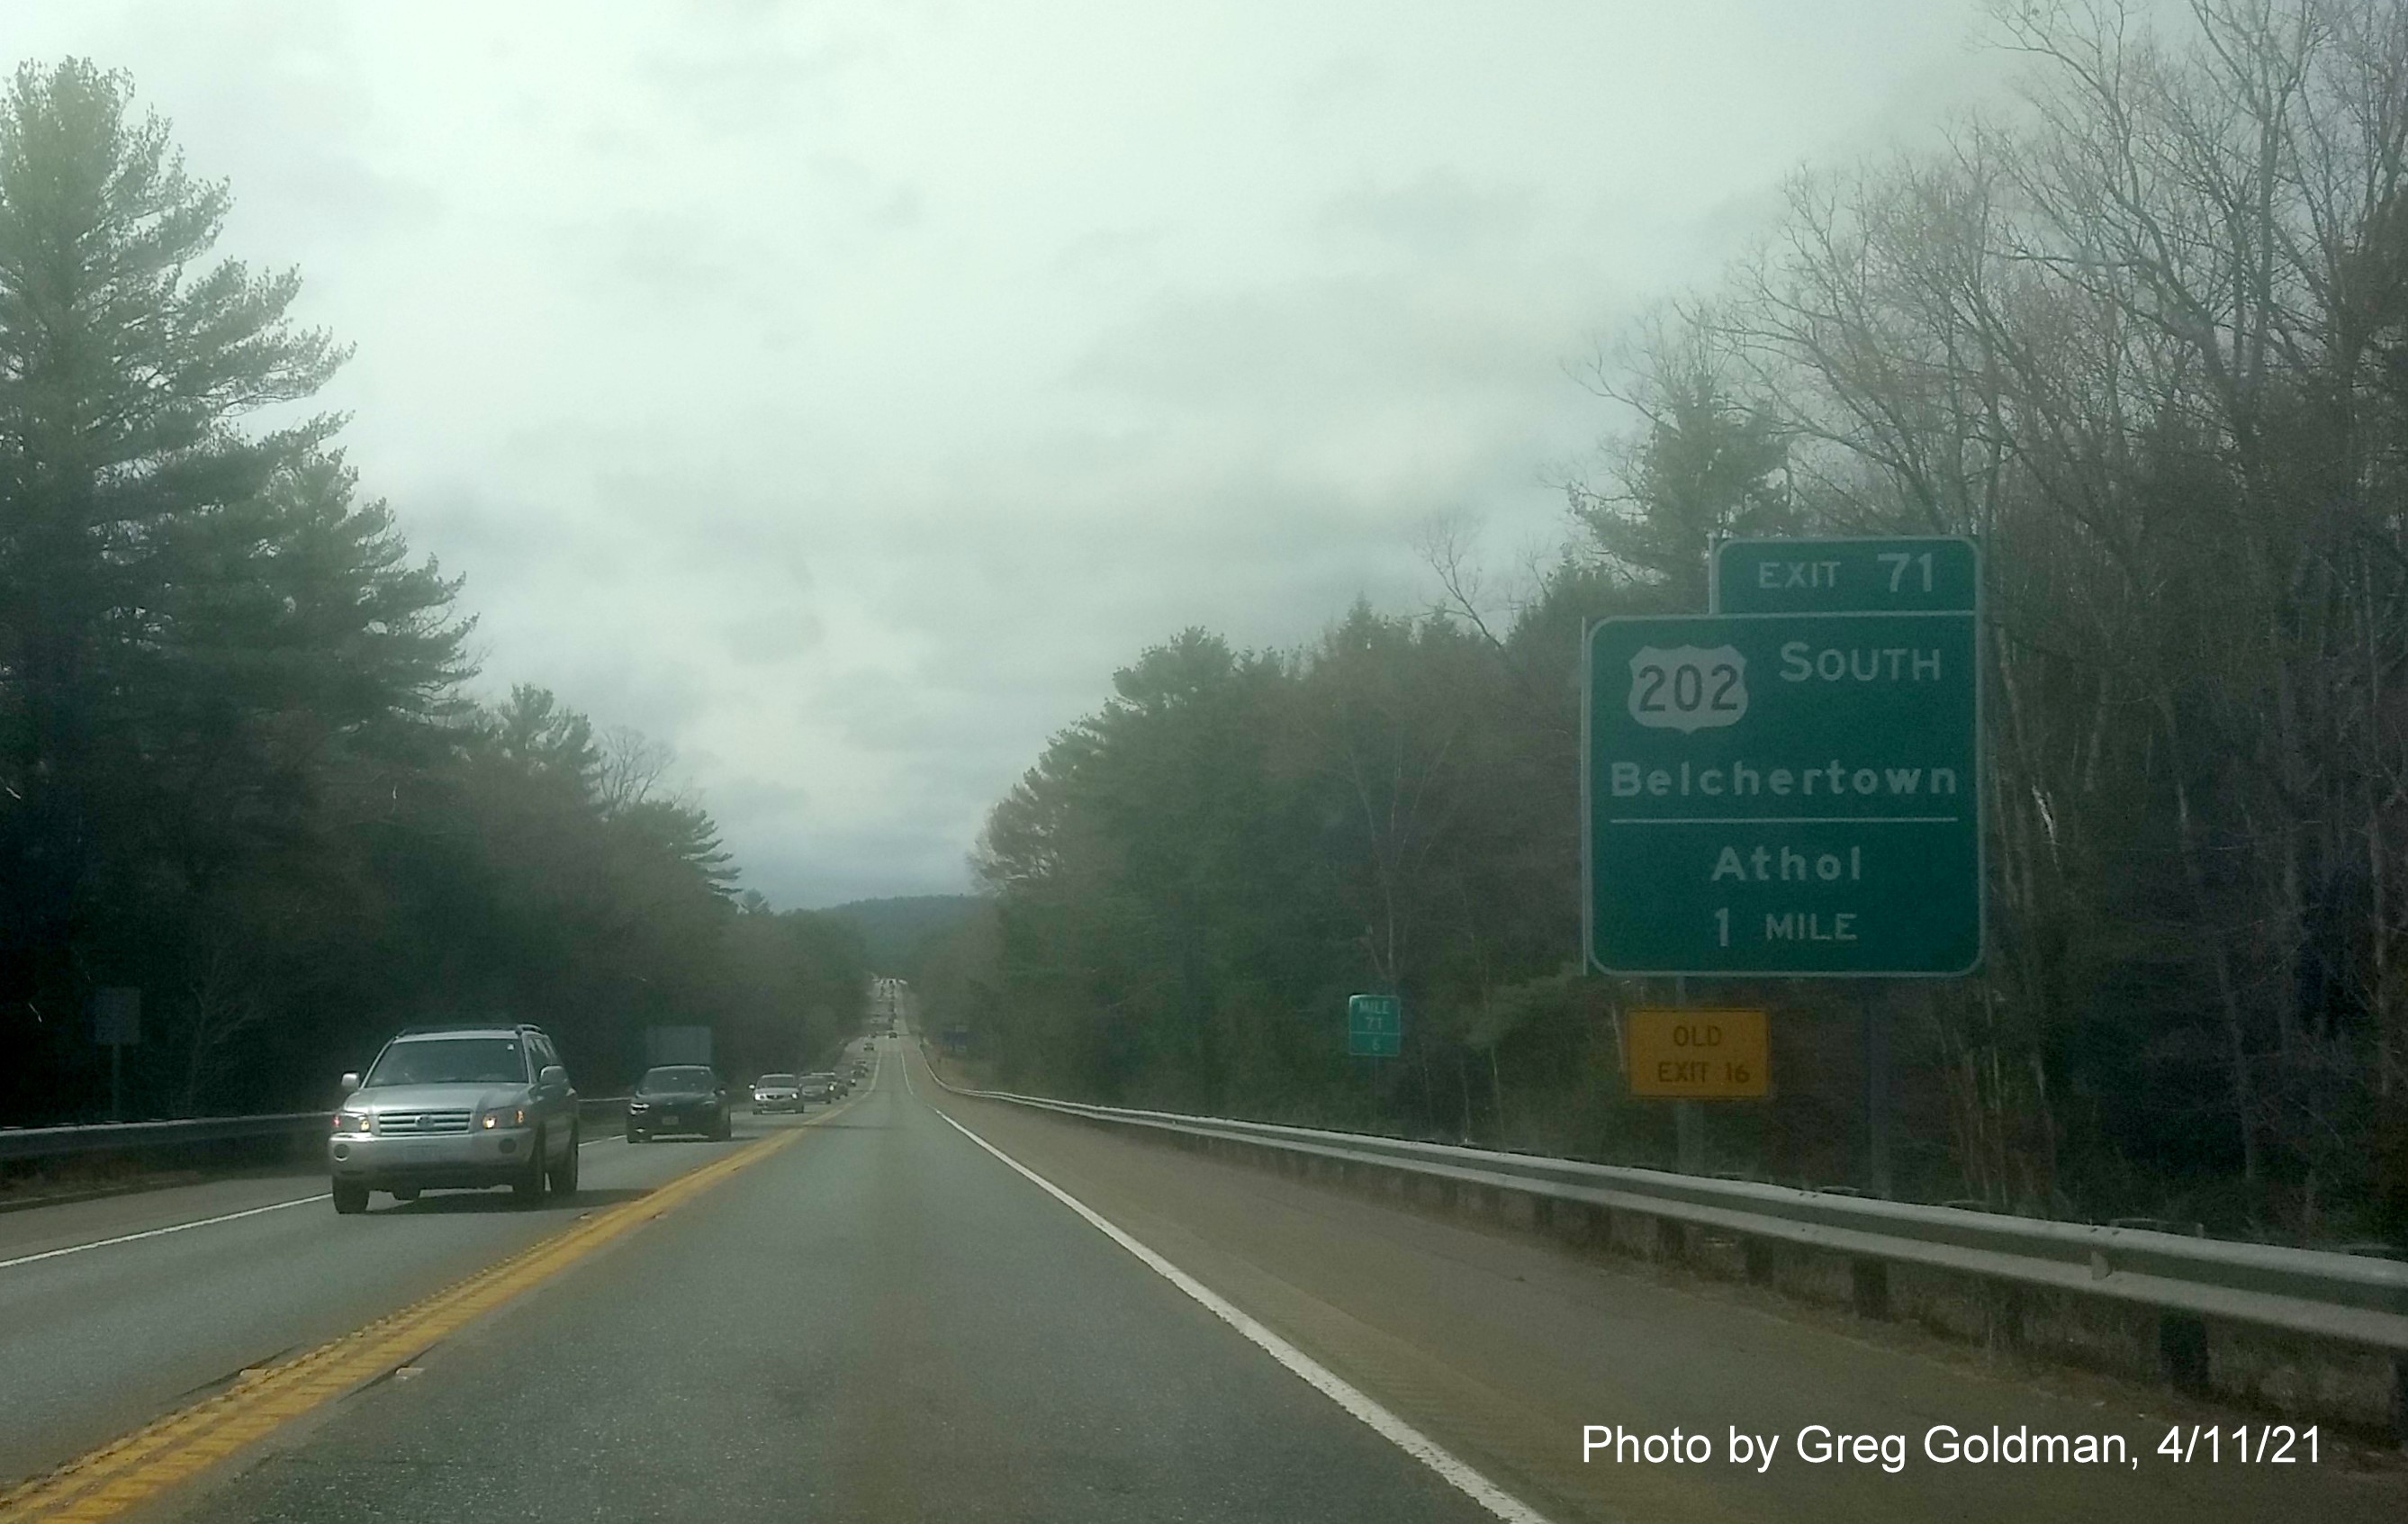 Image of 1 Mile advance sign for US 202 South exit with new milepost based exit number and yellow Old Exit 16 sign on left support on MA 2 West in Athol, by Greg Goldman, April 2021